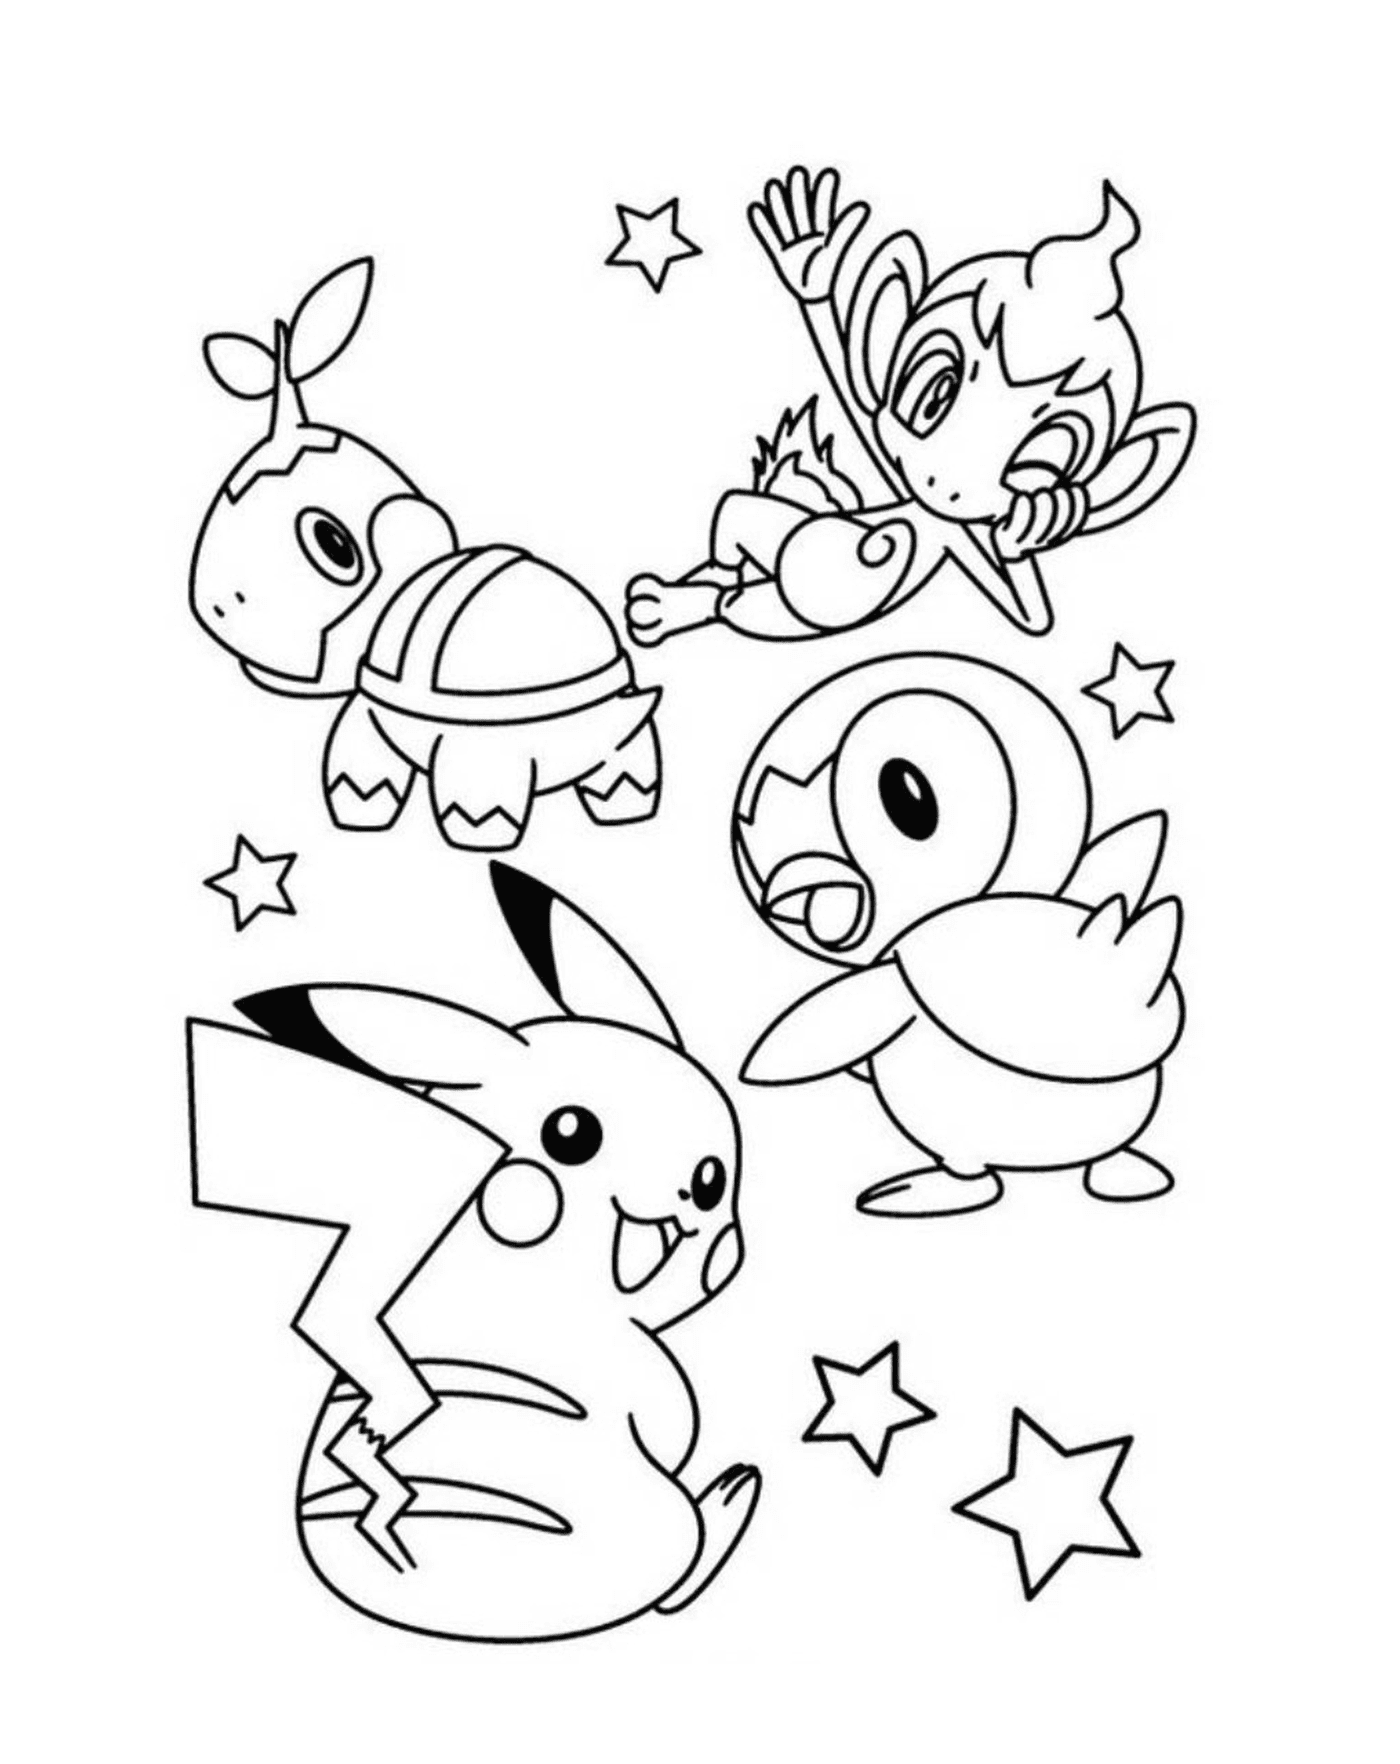  A bunch of Pokémon for the kids 